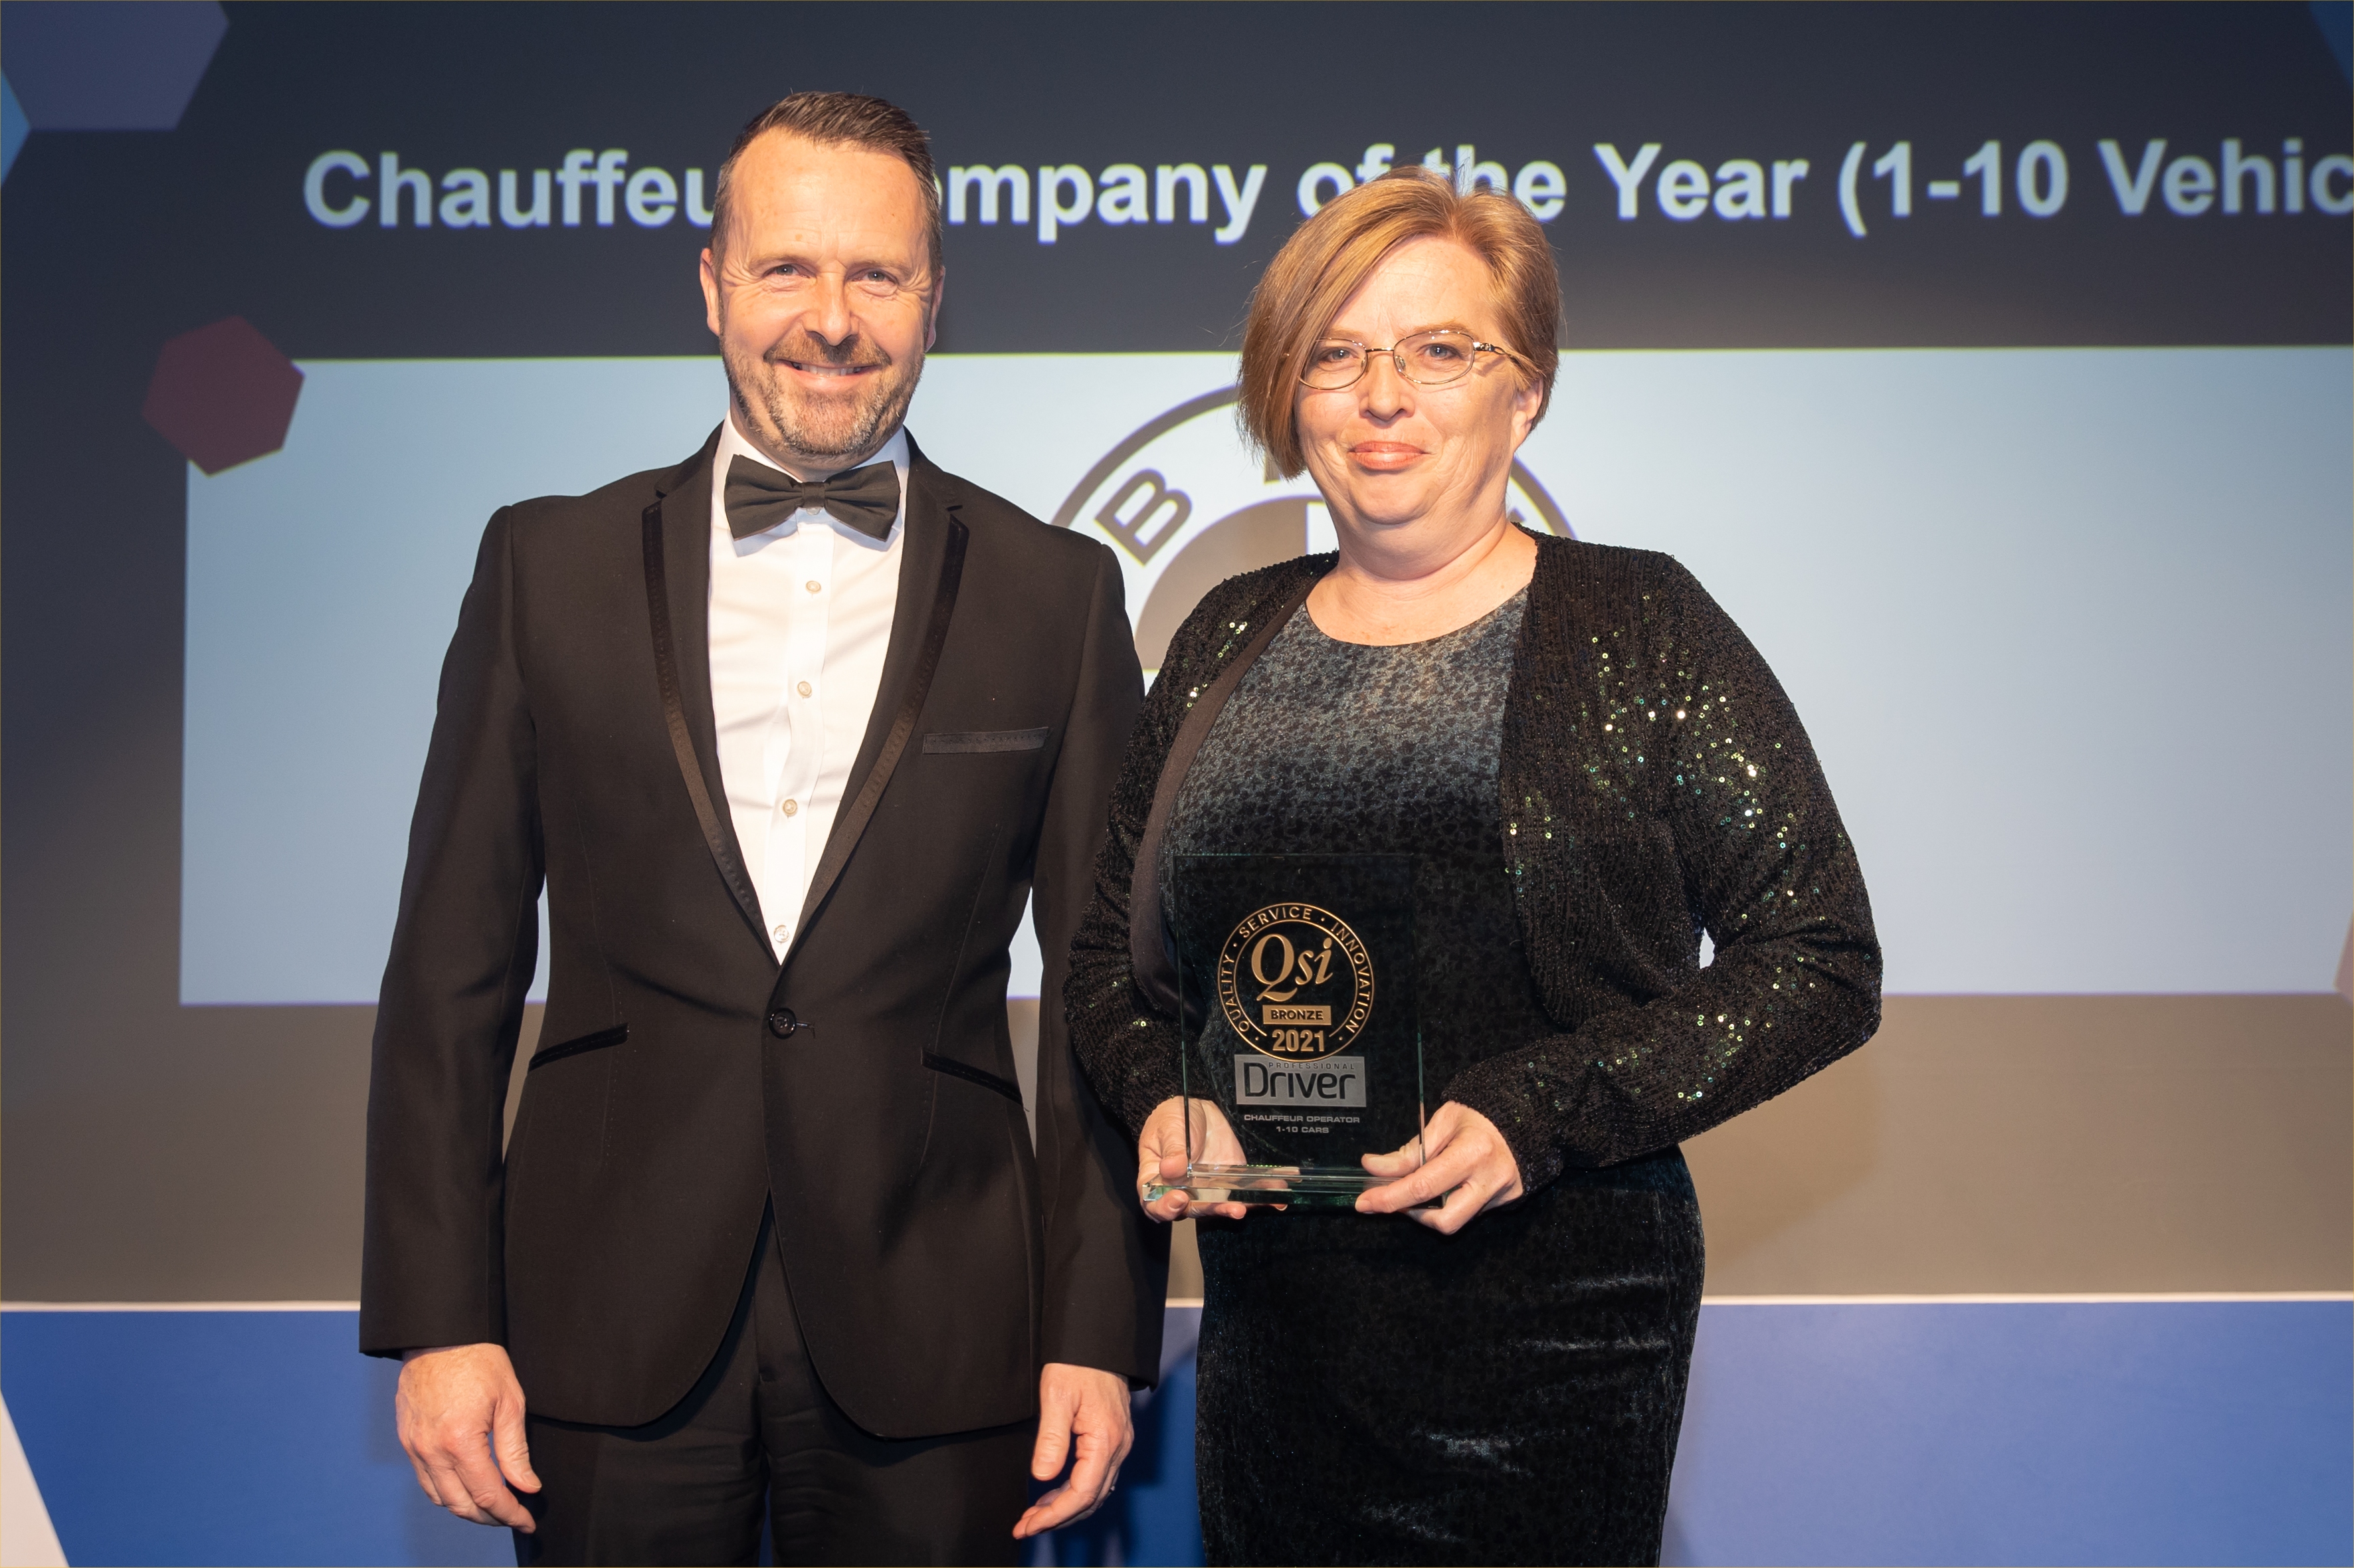 Success for JRA Chauffeur Drive at 2021 Professional Driver QSi Awards